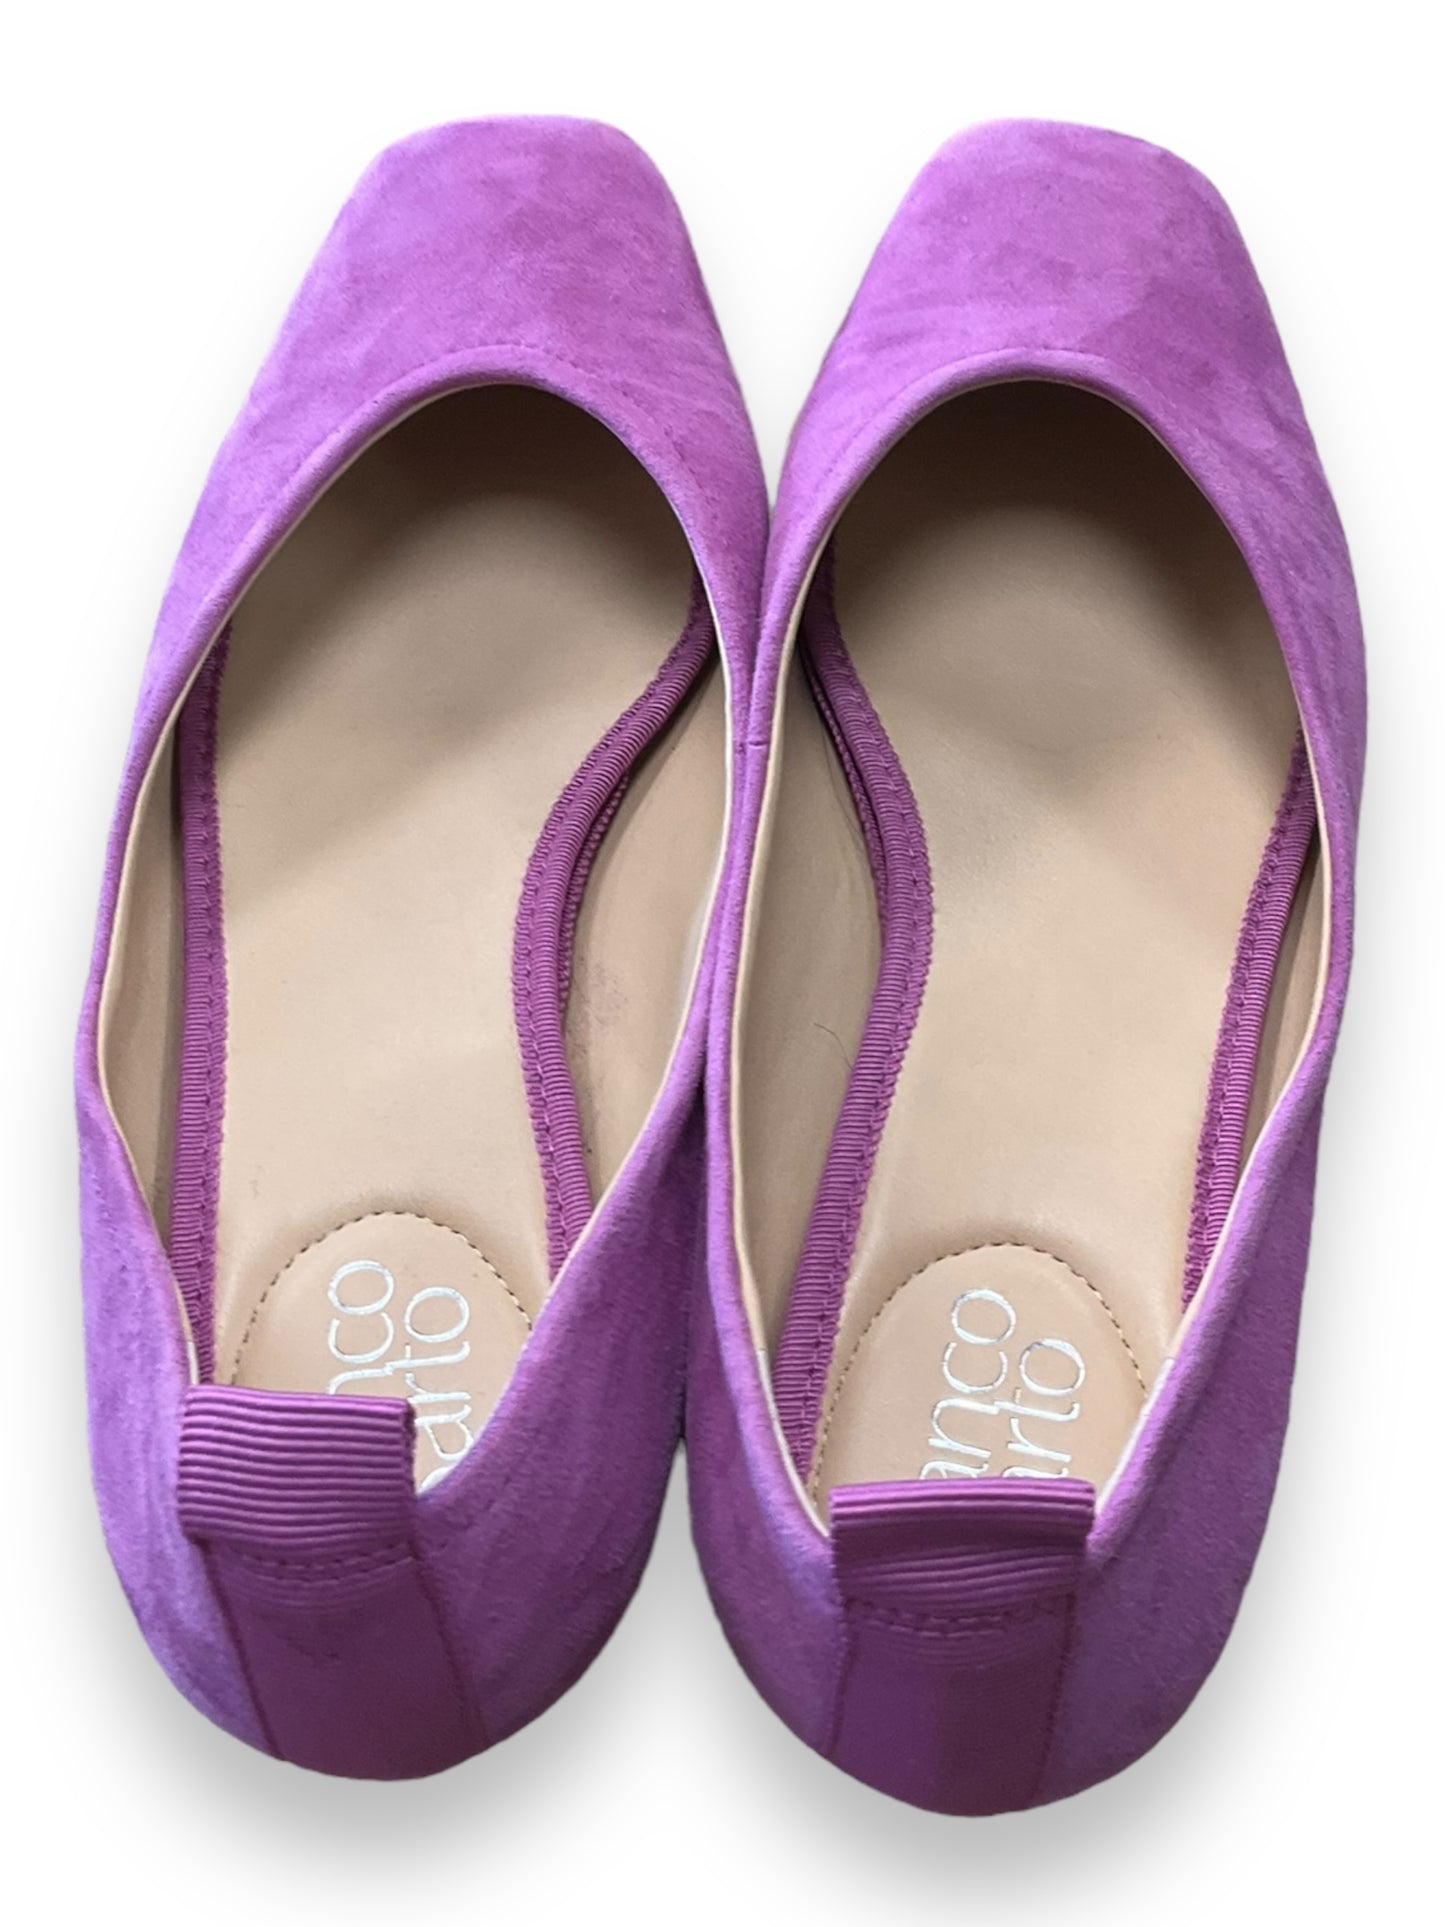 Shoes Flats Ballet By Franco Sarto  Size: 8.5